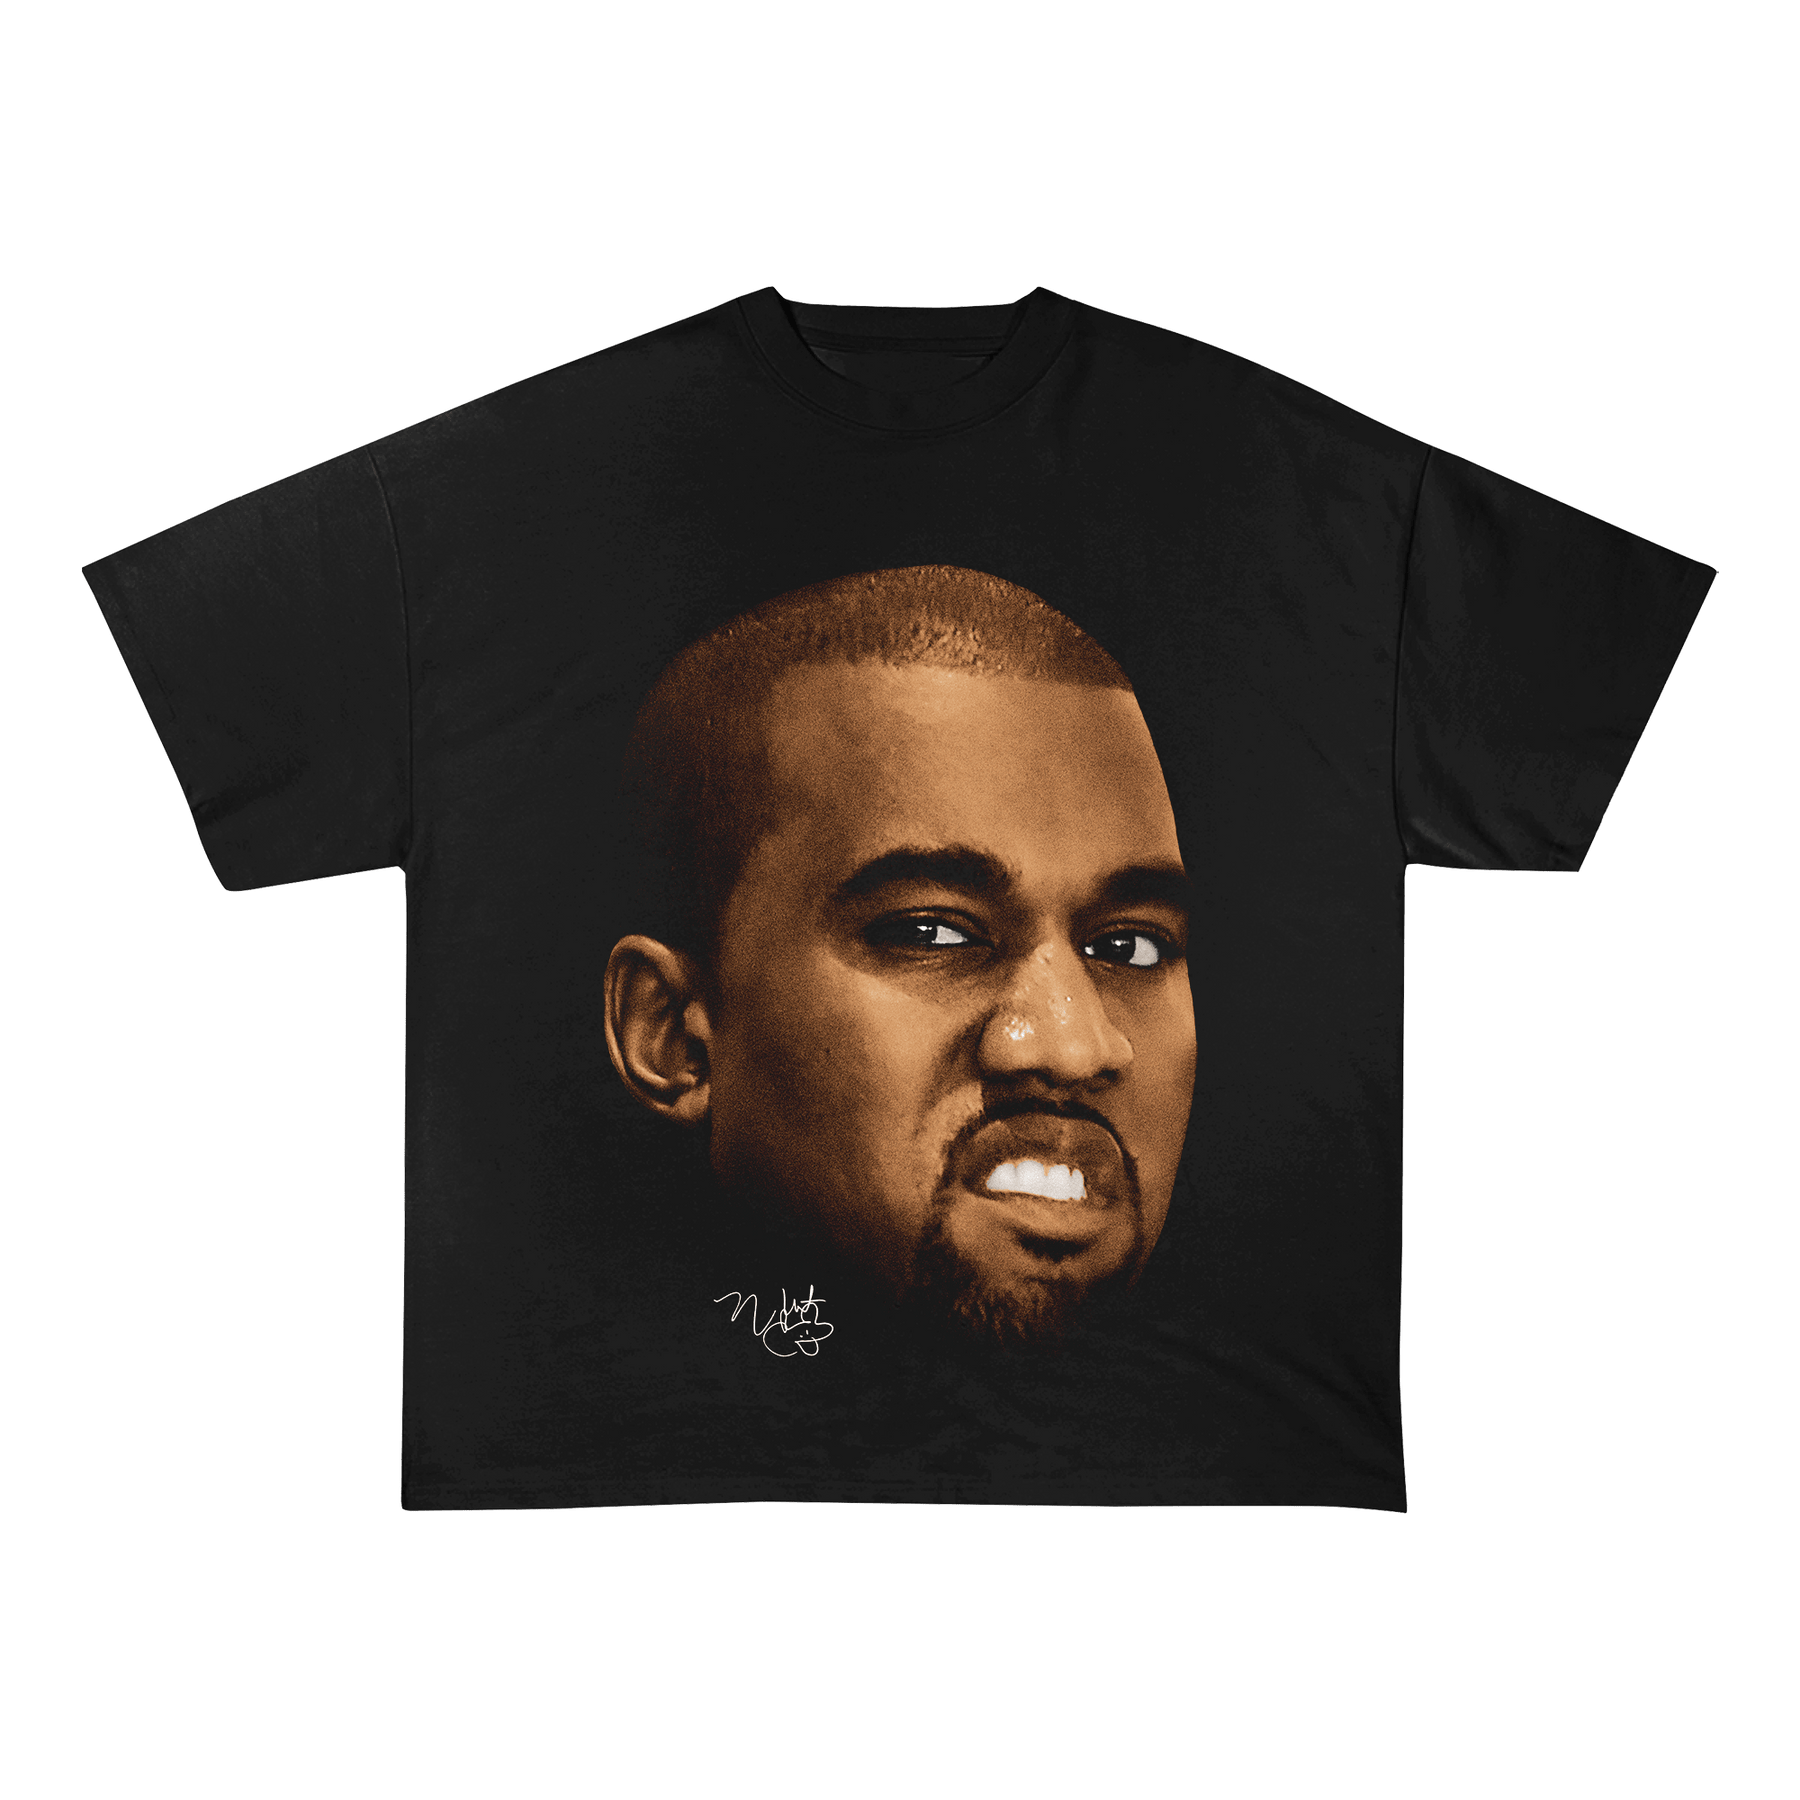 RDMCLOTHINGART tapestry hoodie KANYEWEST WEIGHT COTTON TEE-8027